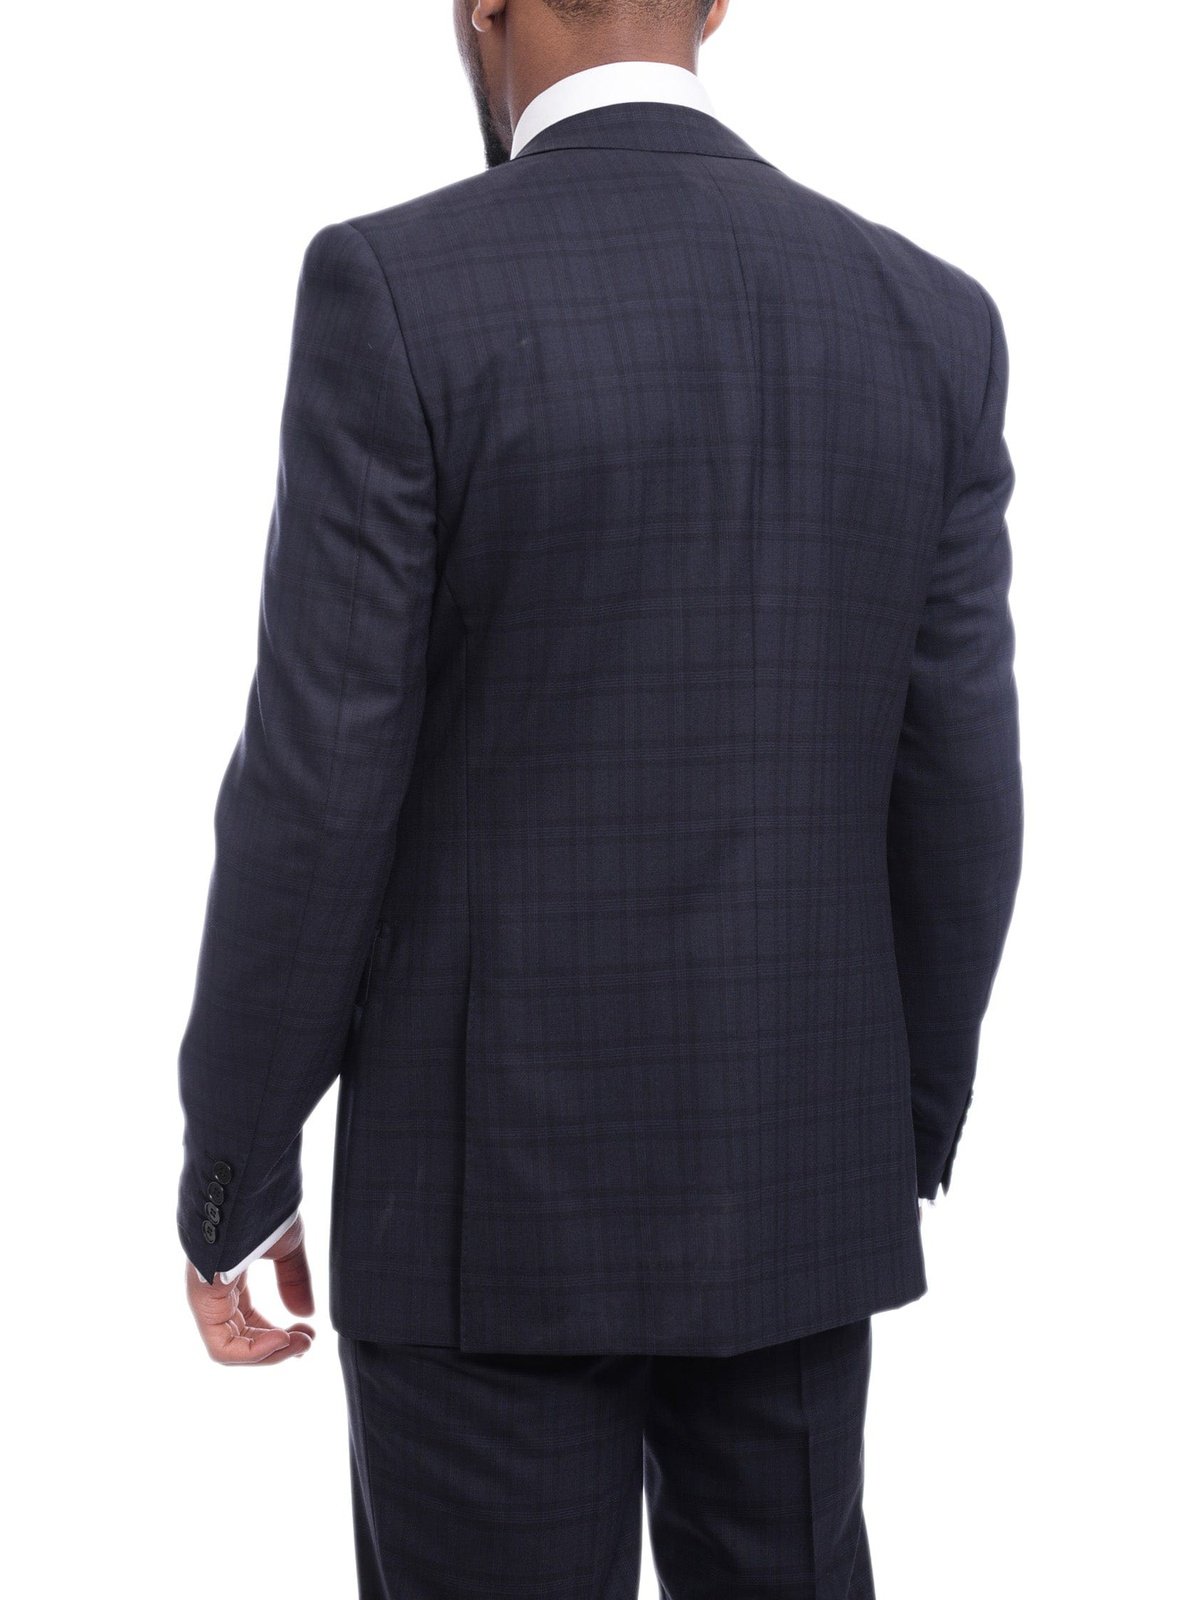 Napoli TWO PIECE SUITS Napoli Slim Fit Navy Blue Plaid Two Button Half Canvassed Wool Suit